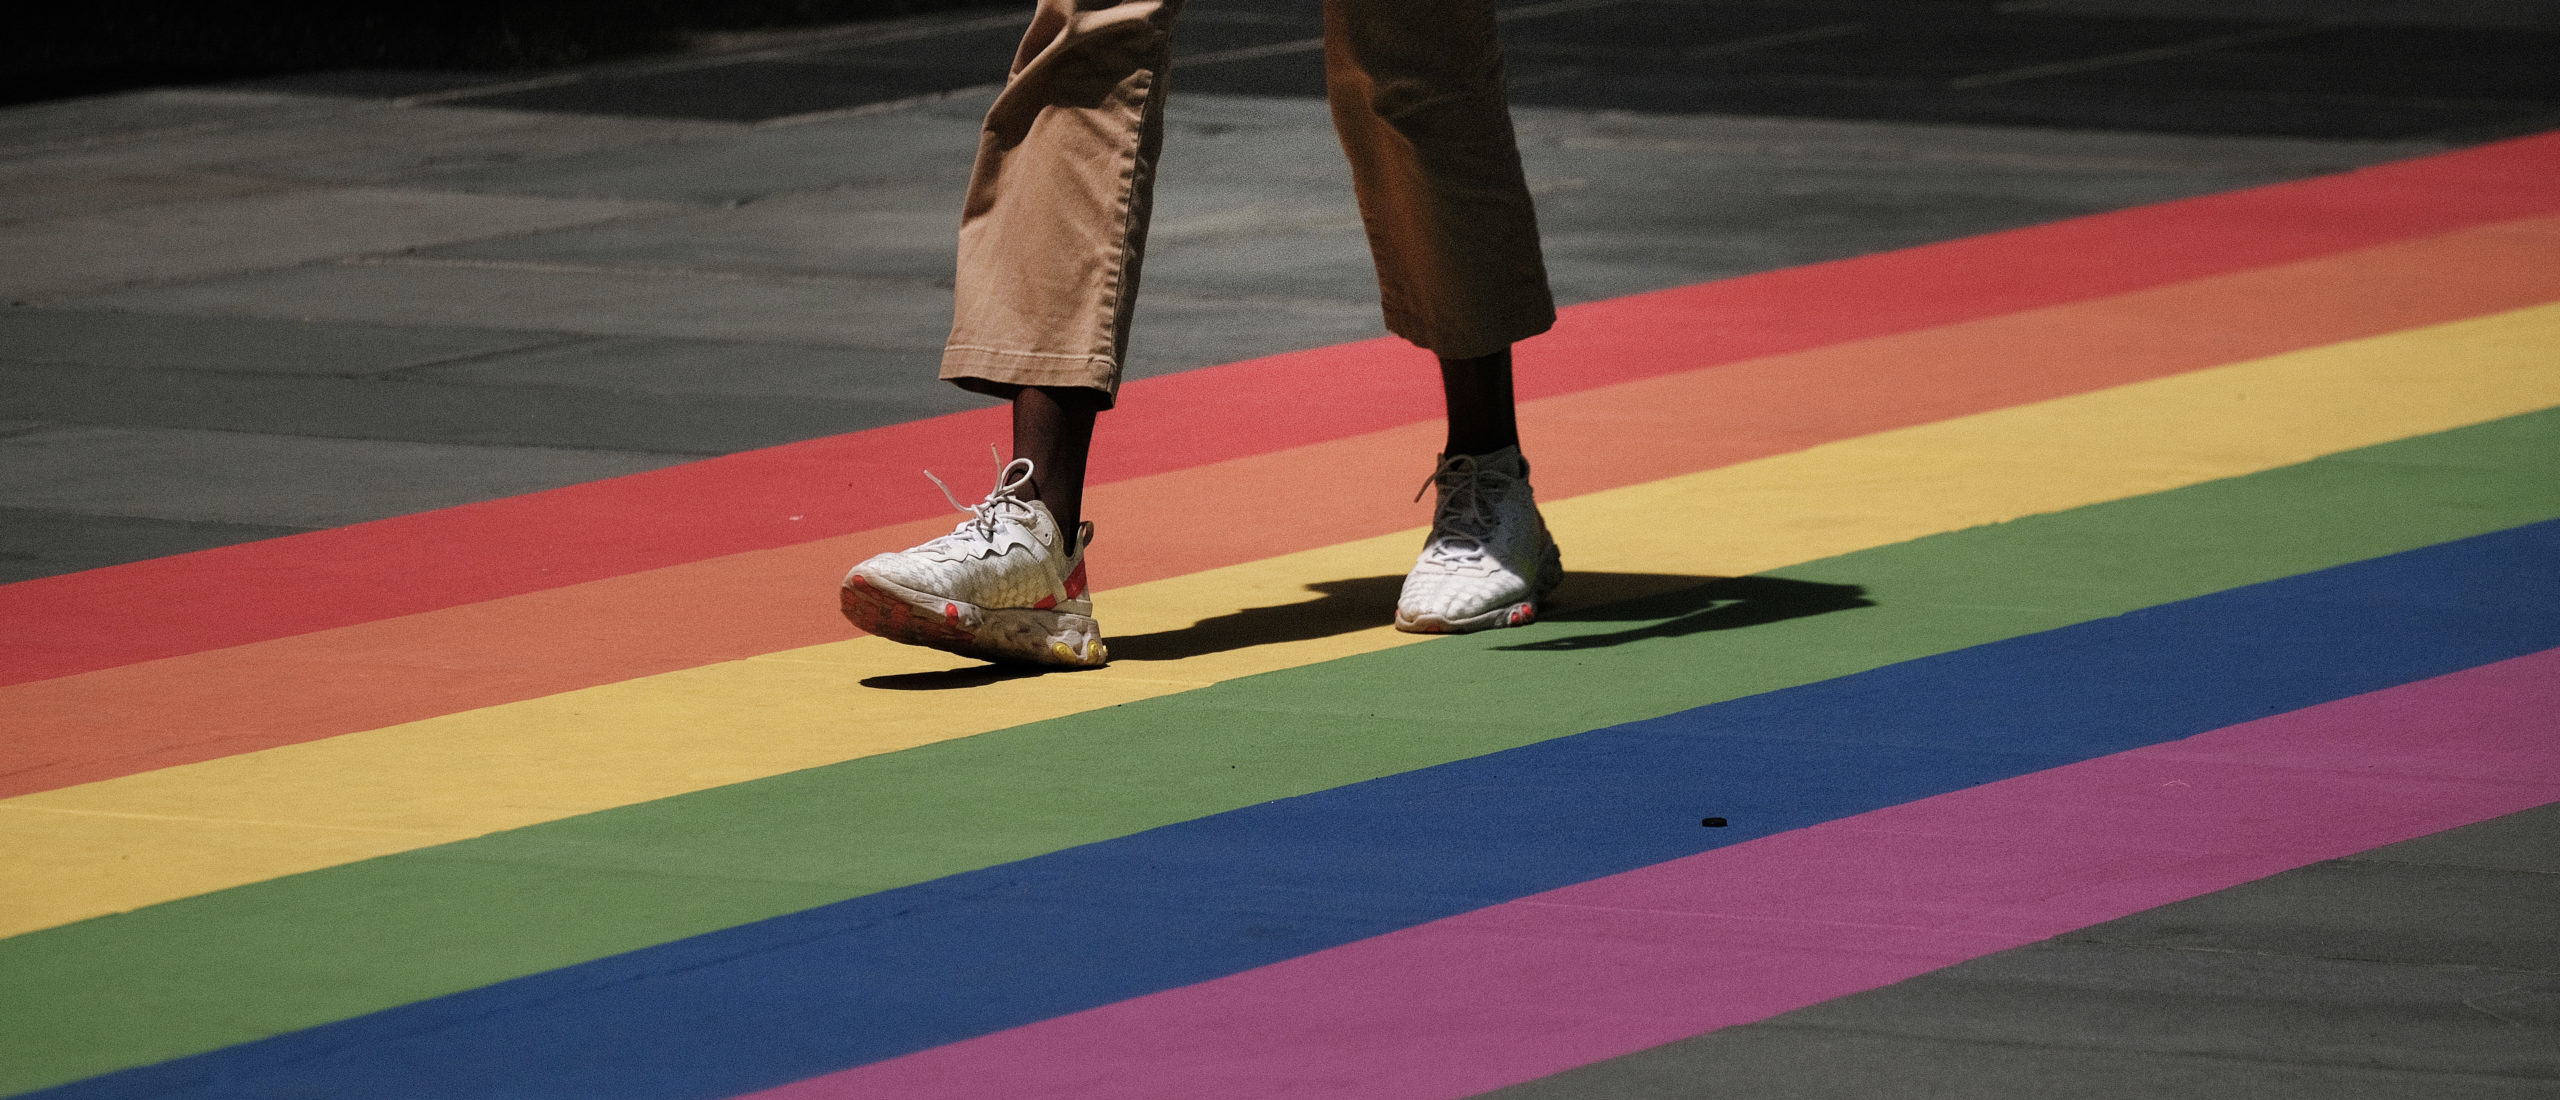 A pedestrian walkway is painted in rainbow colors at Rockefeller Center as the city celebrates Pride Month on June 25, 2021 in New York City.